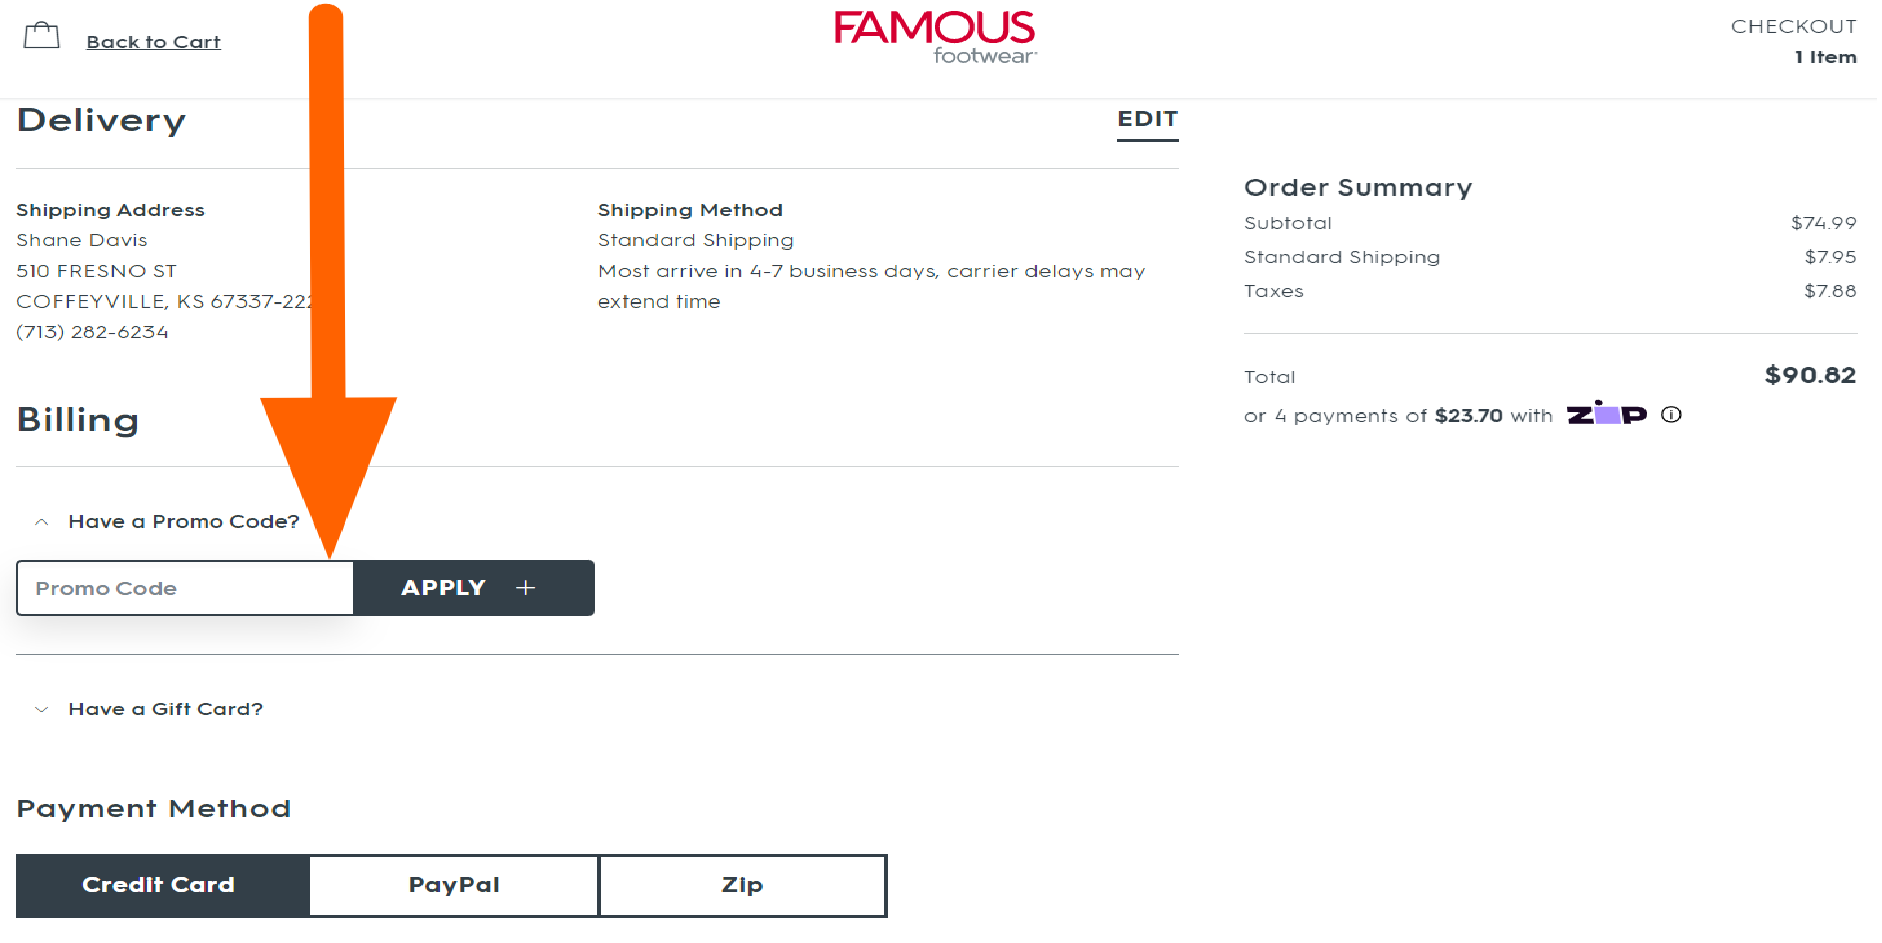 famous footwear coupon code